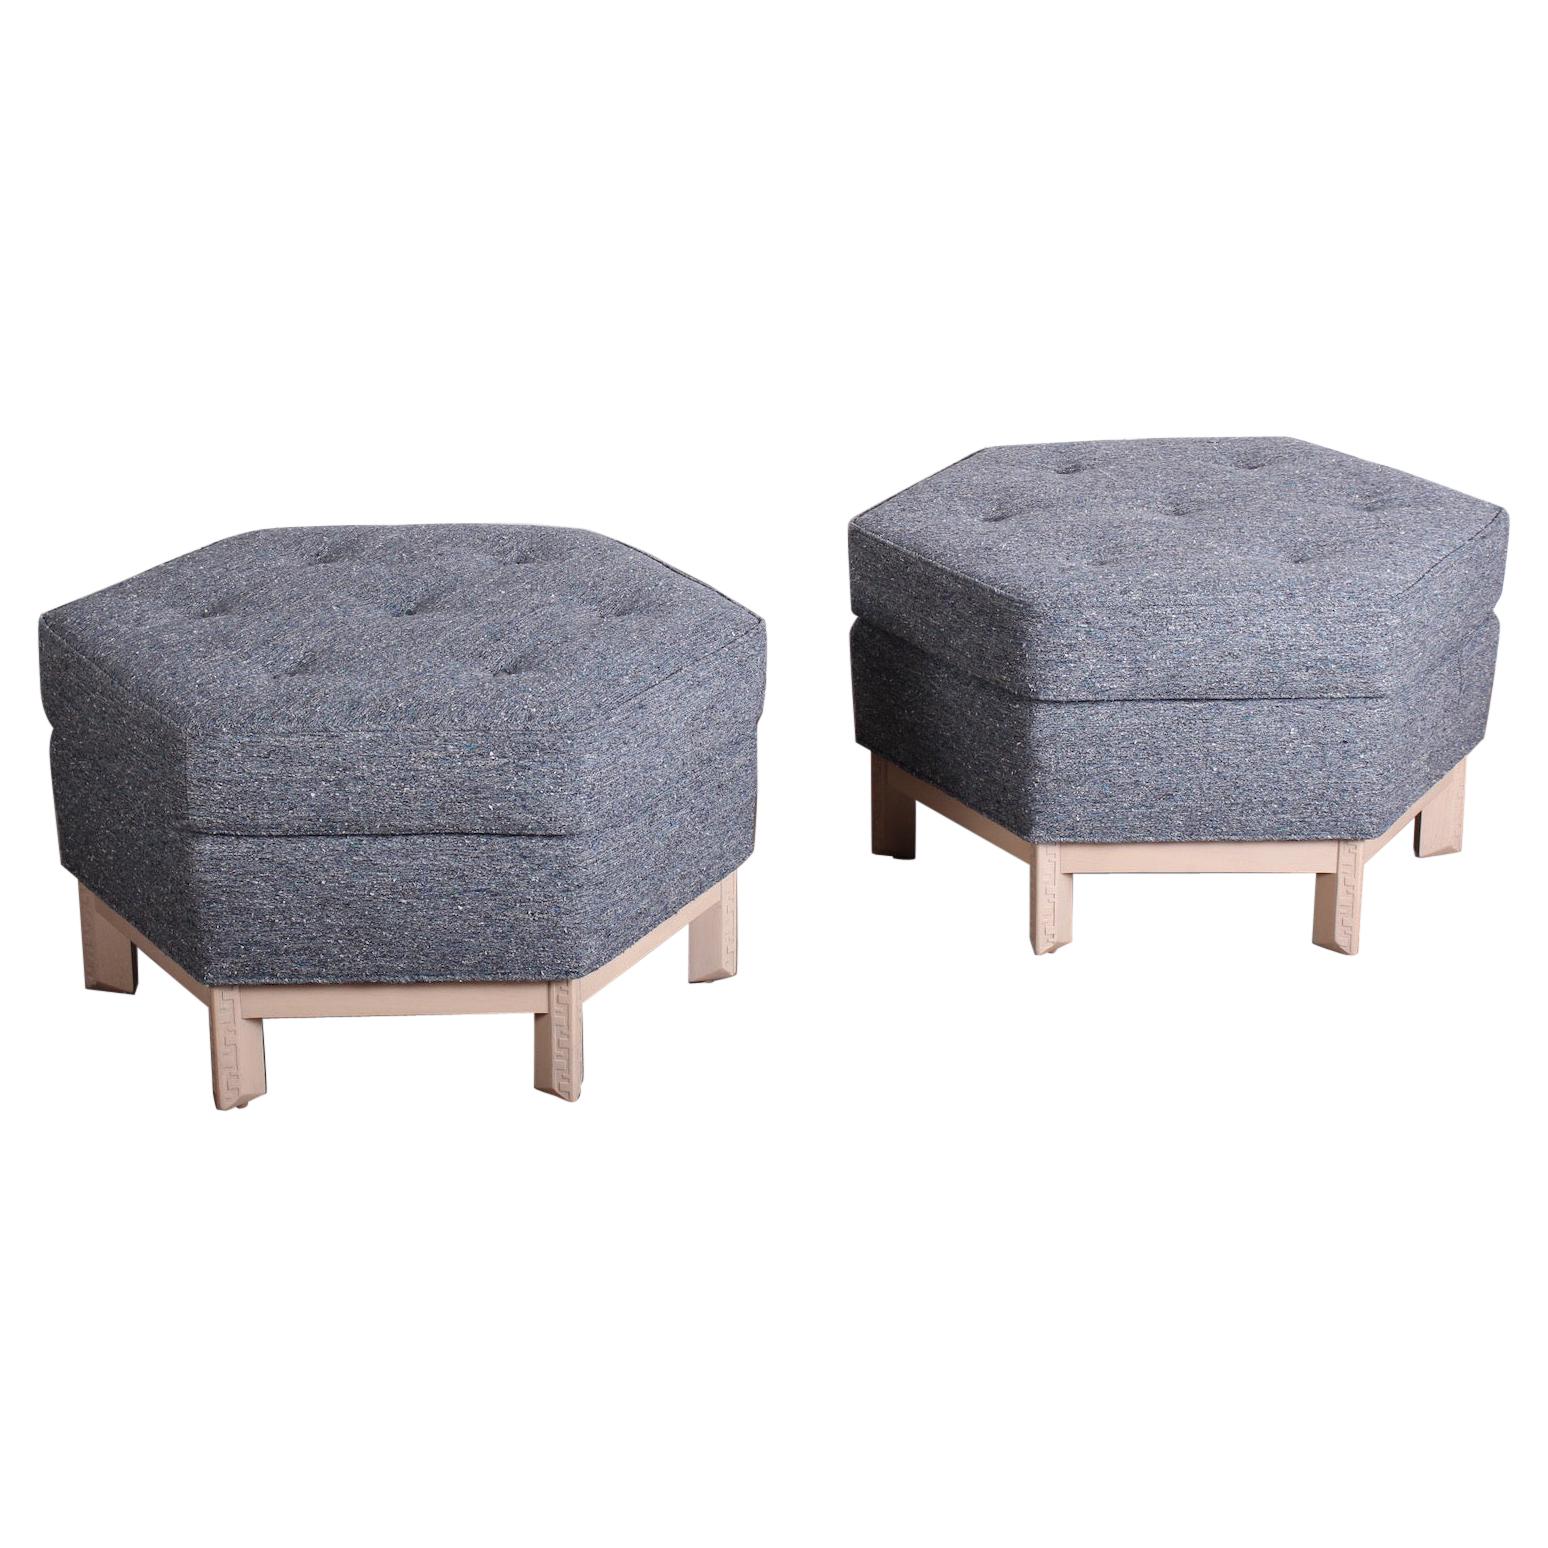 Pair of Ottomans by Frank Lloyd Wright for Henredon